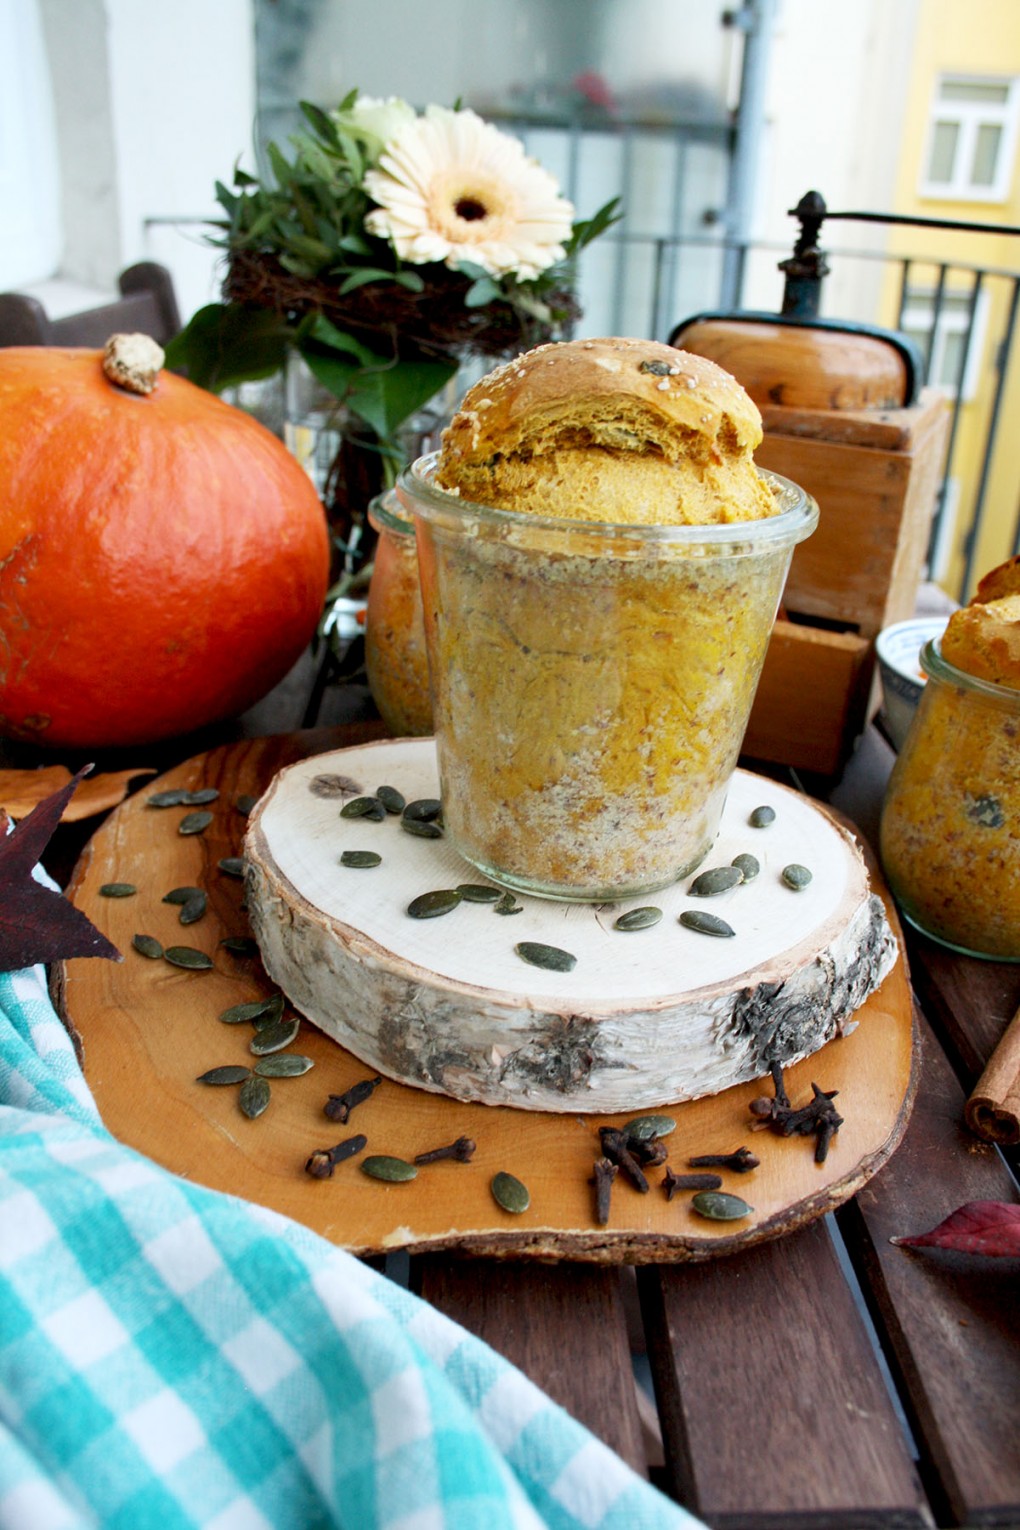 Pumpkin Yeast Bread in a Jar: easy and aromatic pumpkin bread that can be preserved for later. Great homemade gift idea for holidays for your loved ones!